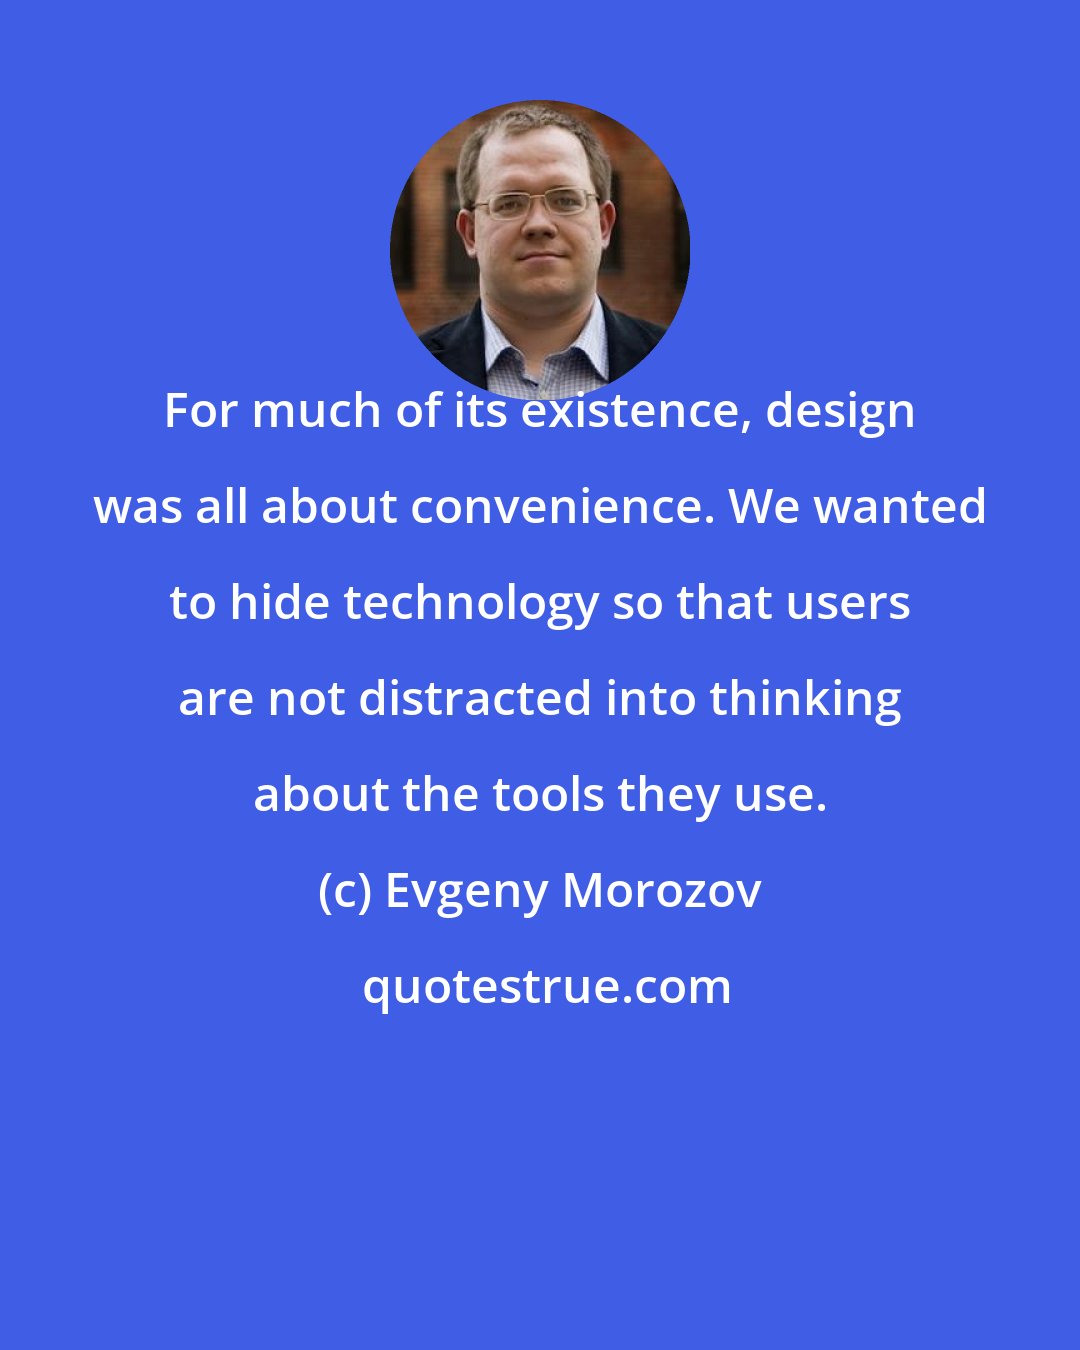 Evgeny Morozov: For much of its existence, design was all about convenience. We wanted to hide technology so that users are not distracted into thinking about the tools they use.